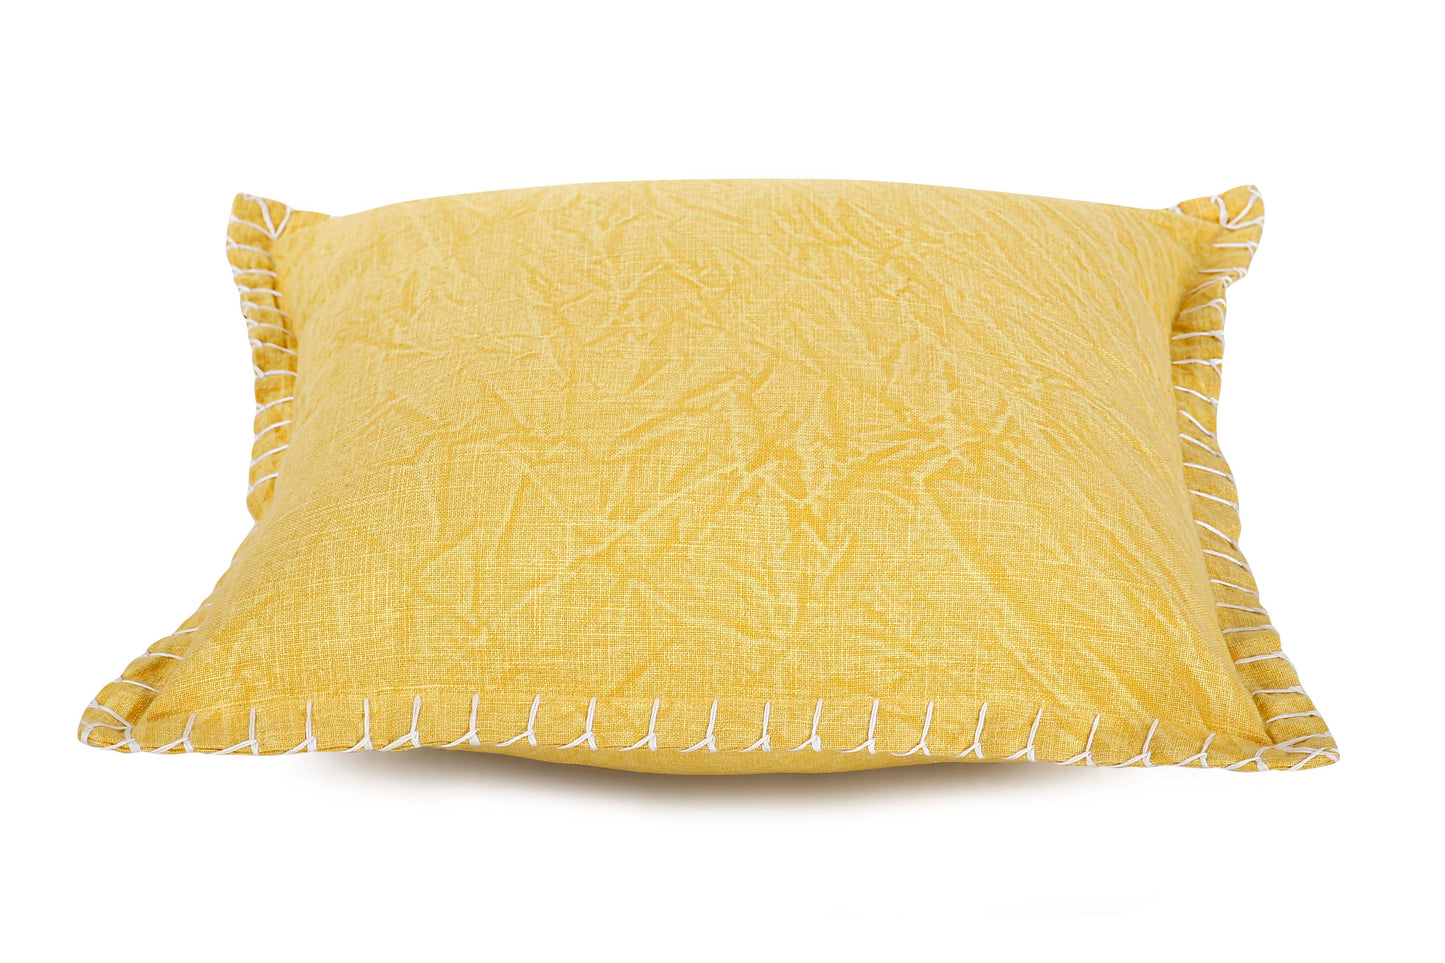 Stone Washed Throw Pillow, Yellow - 21x21 Inch by The Artisen